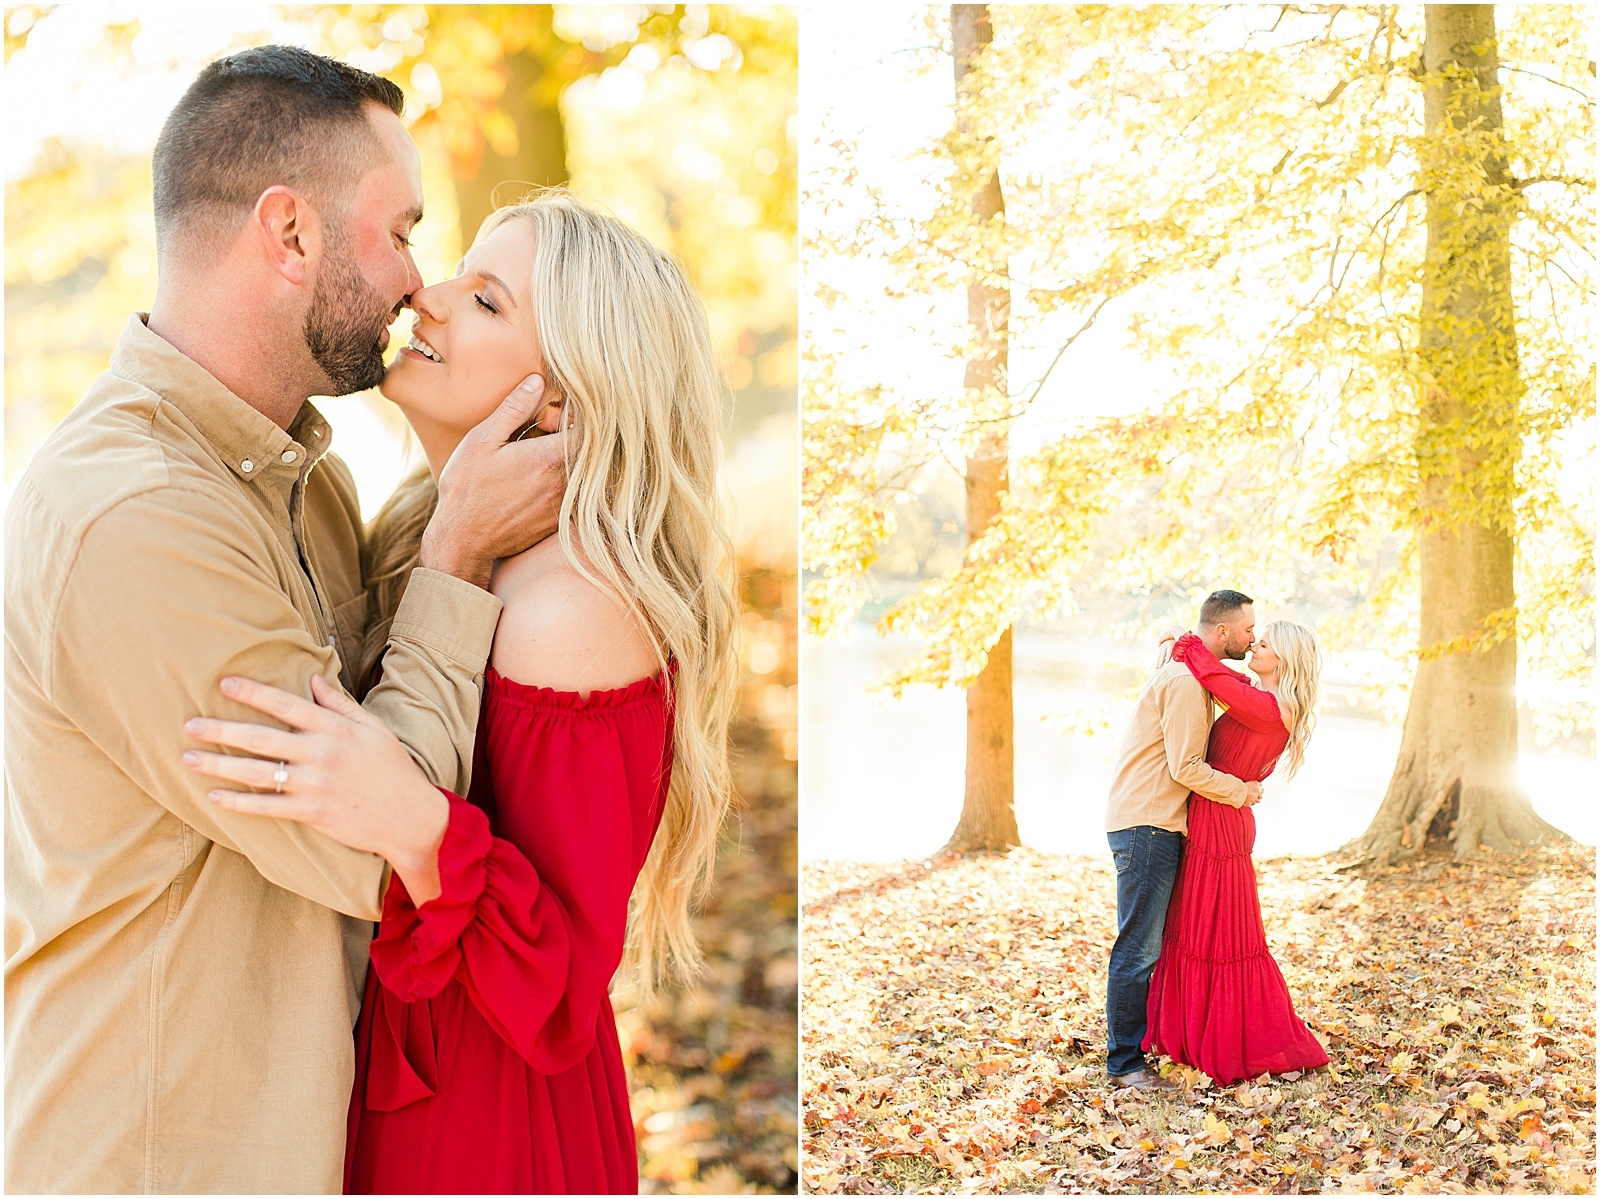 A Southern Indiana Engagement Session | Charleston and Erin | Bret and Brandie Photography021.jpg